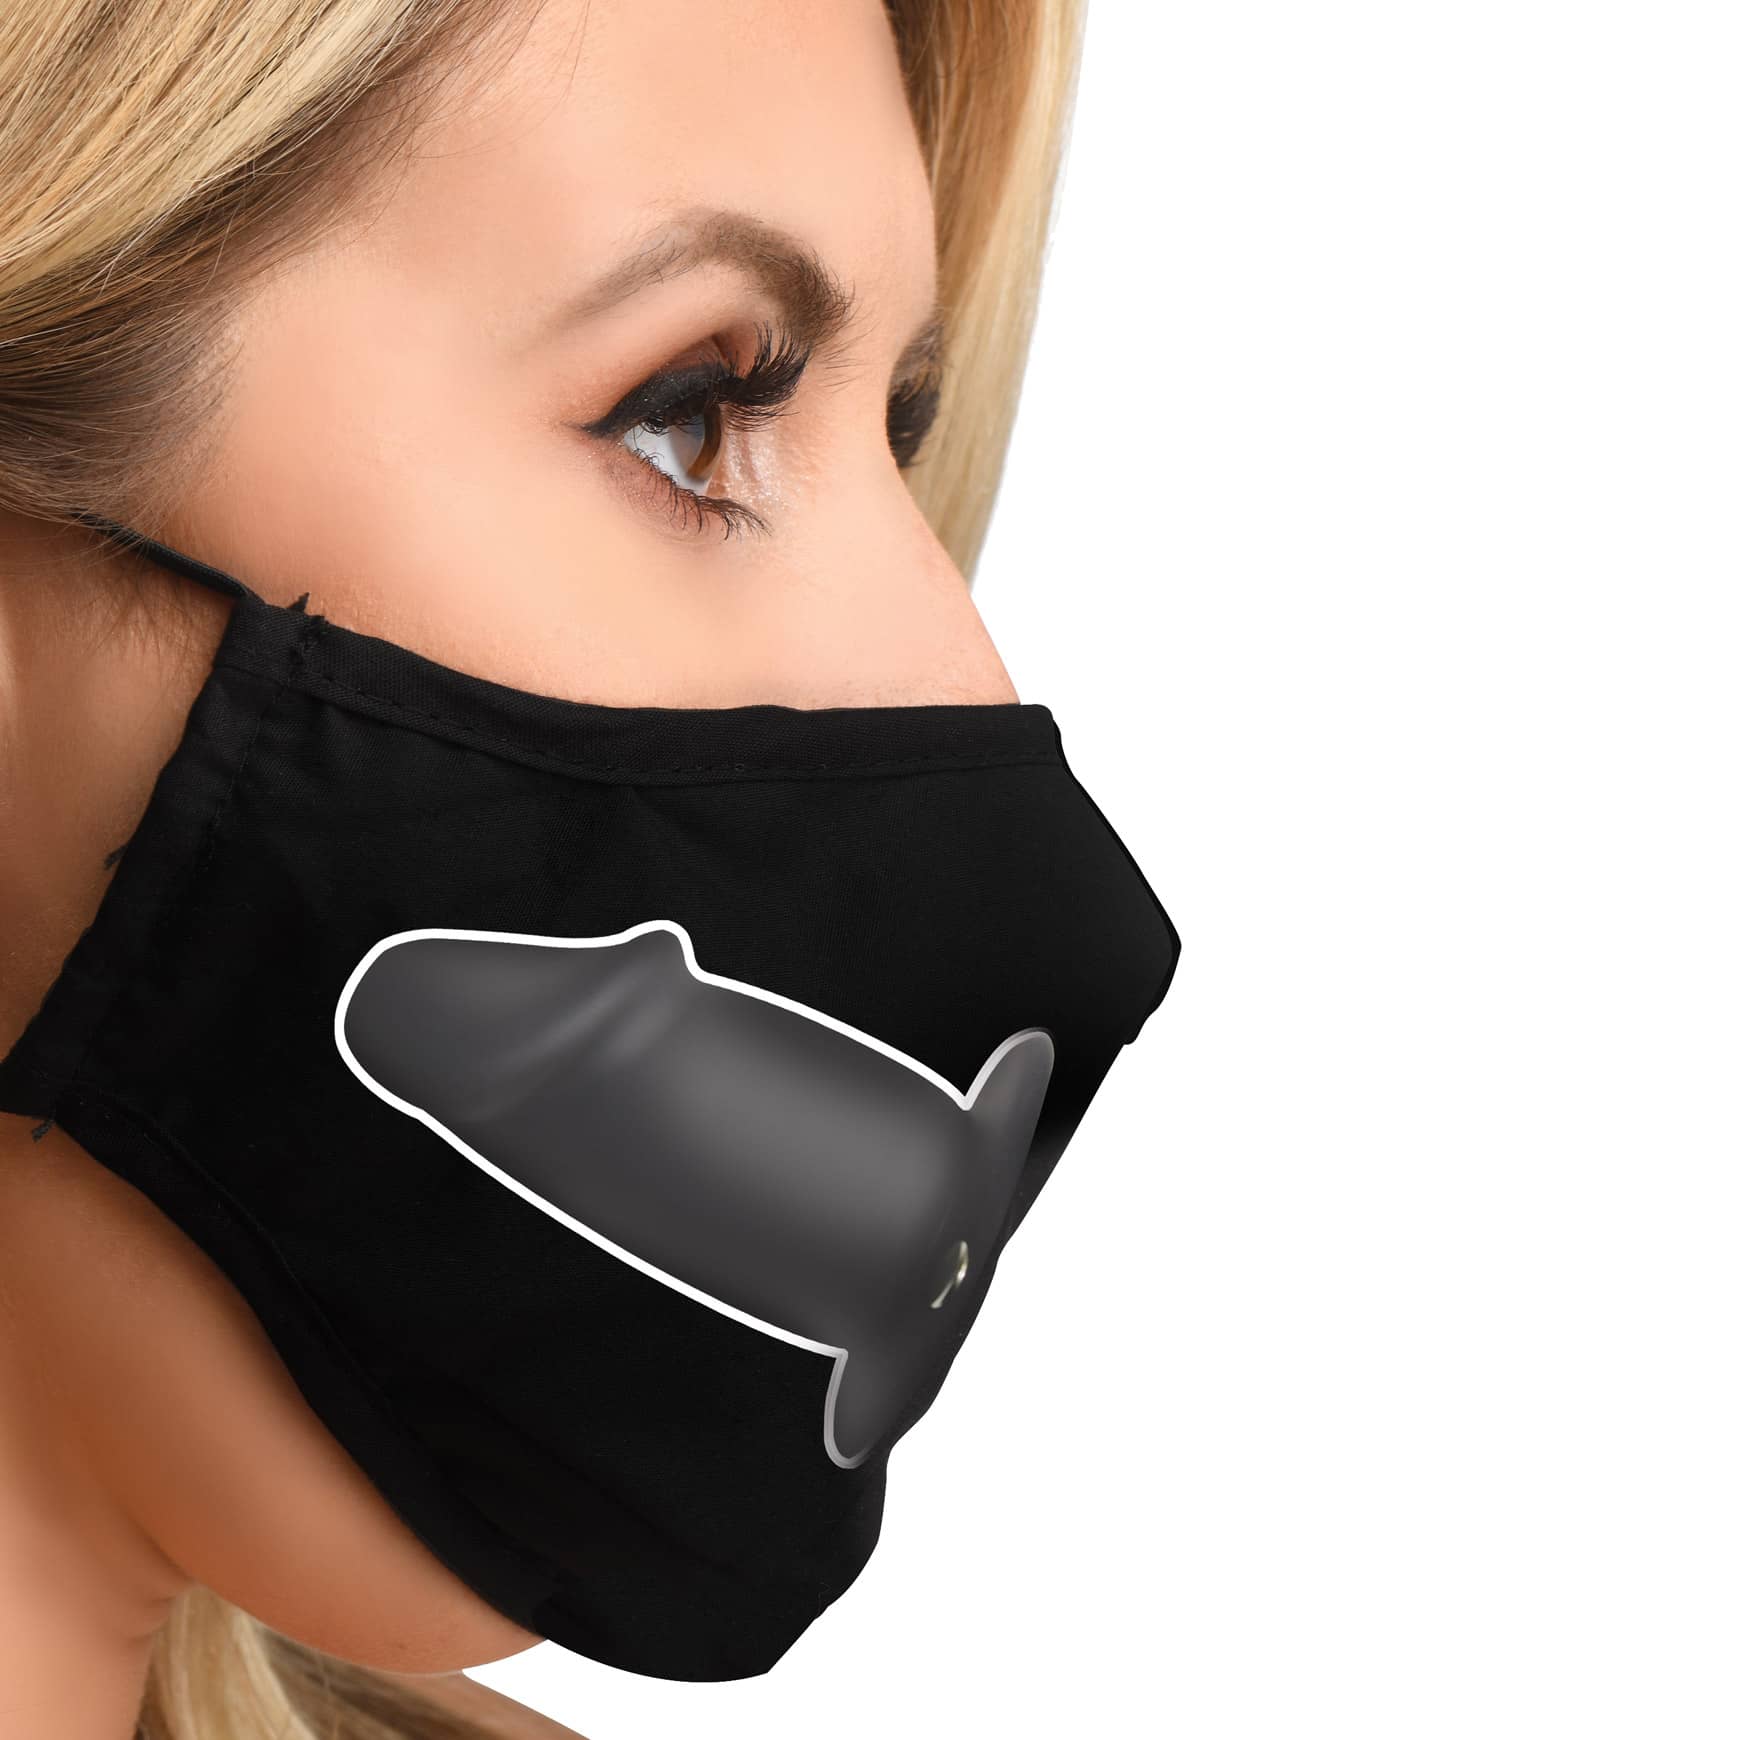 Mouth-Full Dildo Face Mask – The BDSM Toy Shop